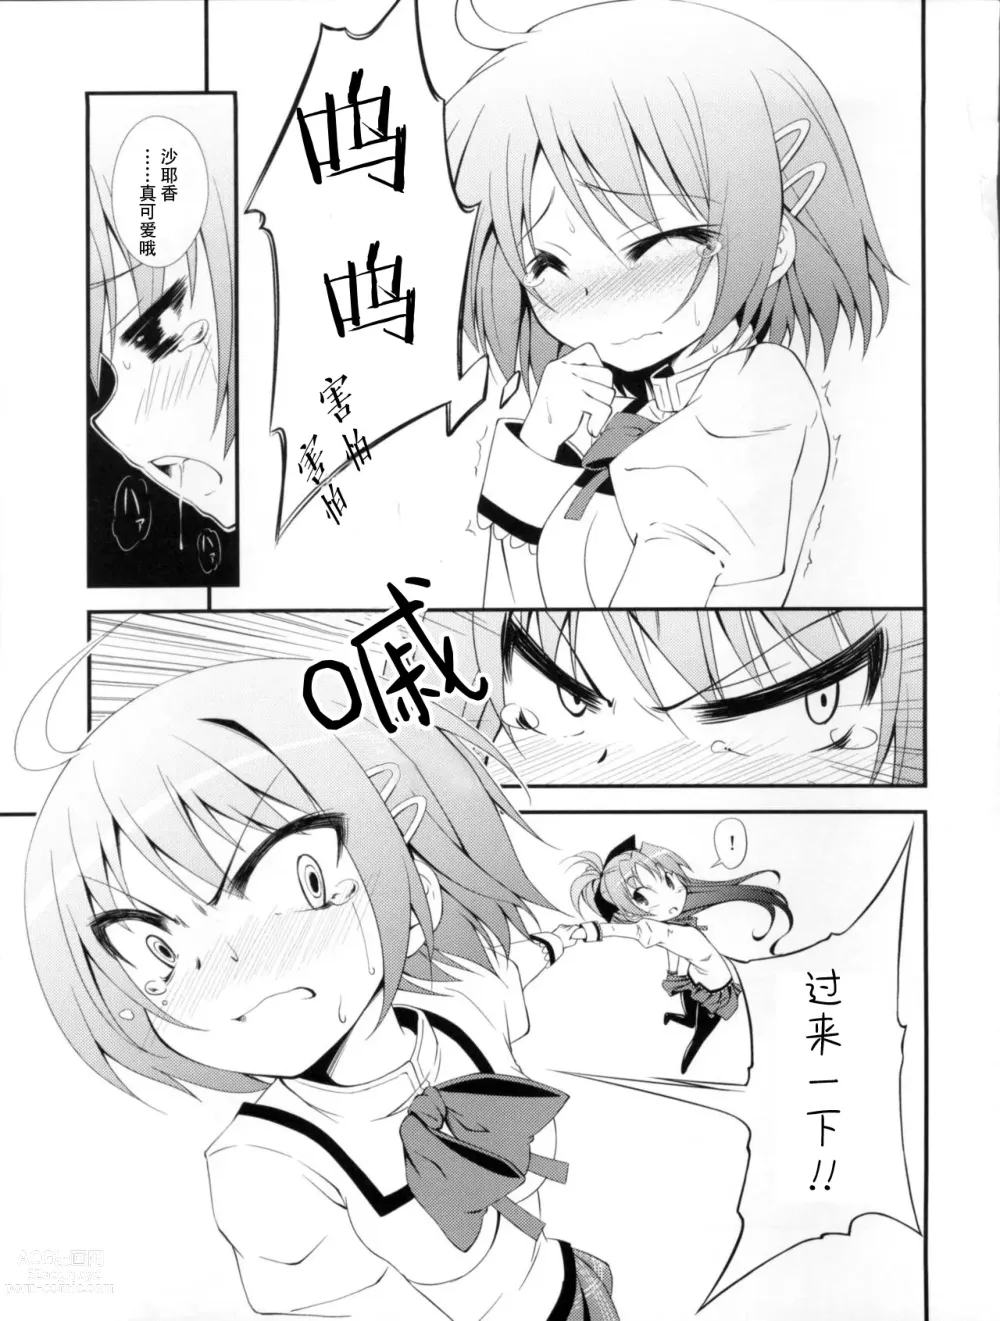 Page 10 of doujinshi Lovely Girls Lily vol. 2